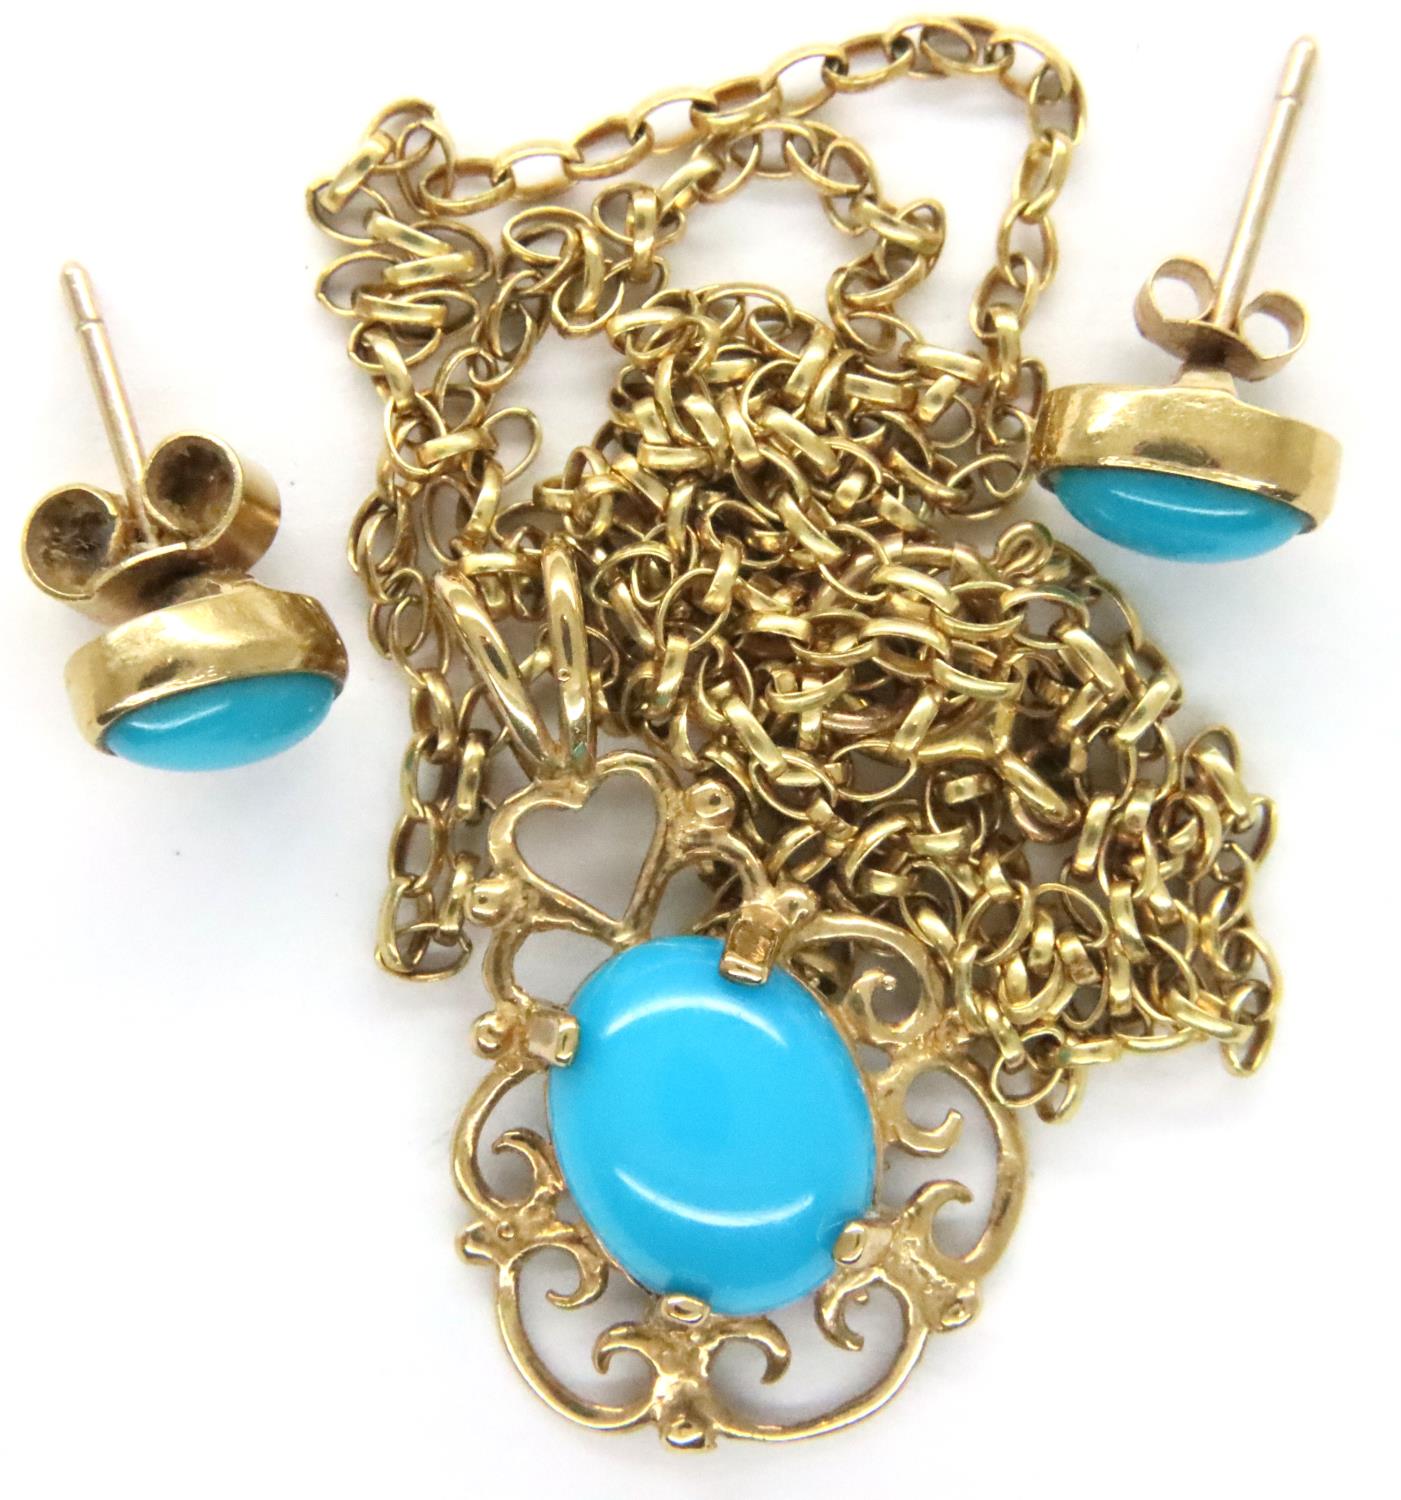 9ct gold turquoise set pendant and earring set, combined 5.2g. P&P Group 1 (£14+VAT for the first